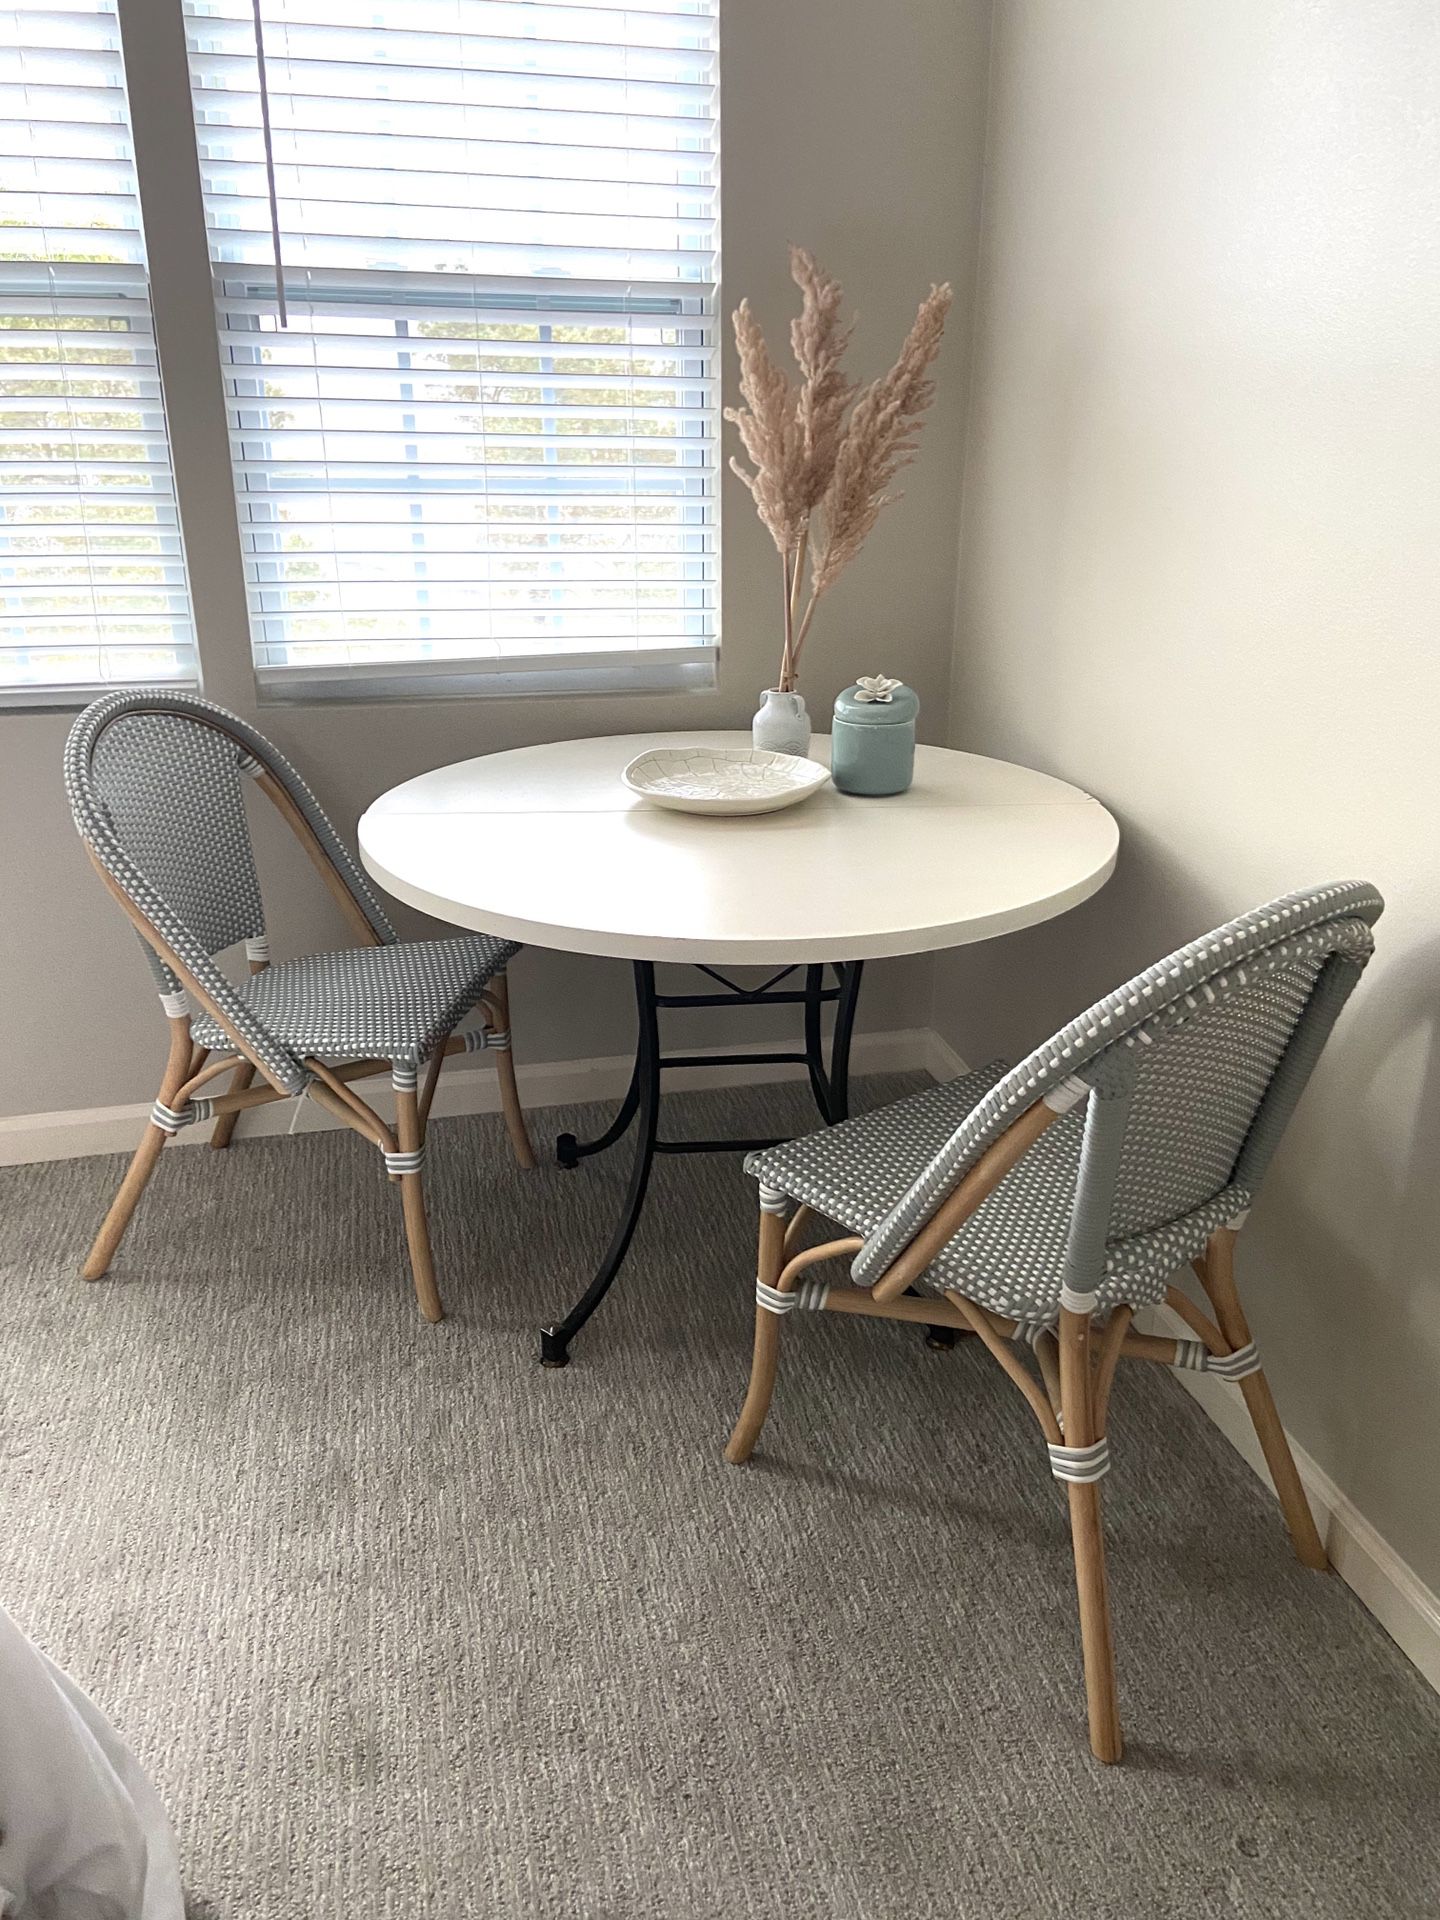 Table with bistro chairs